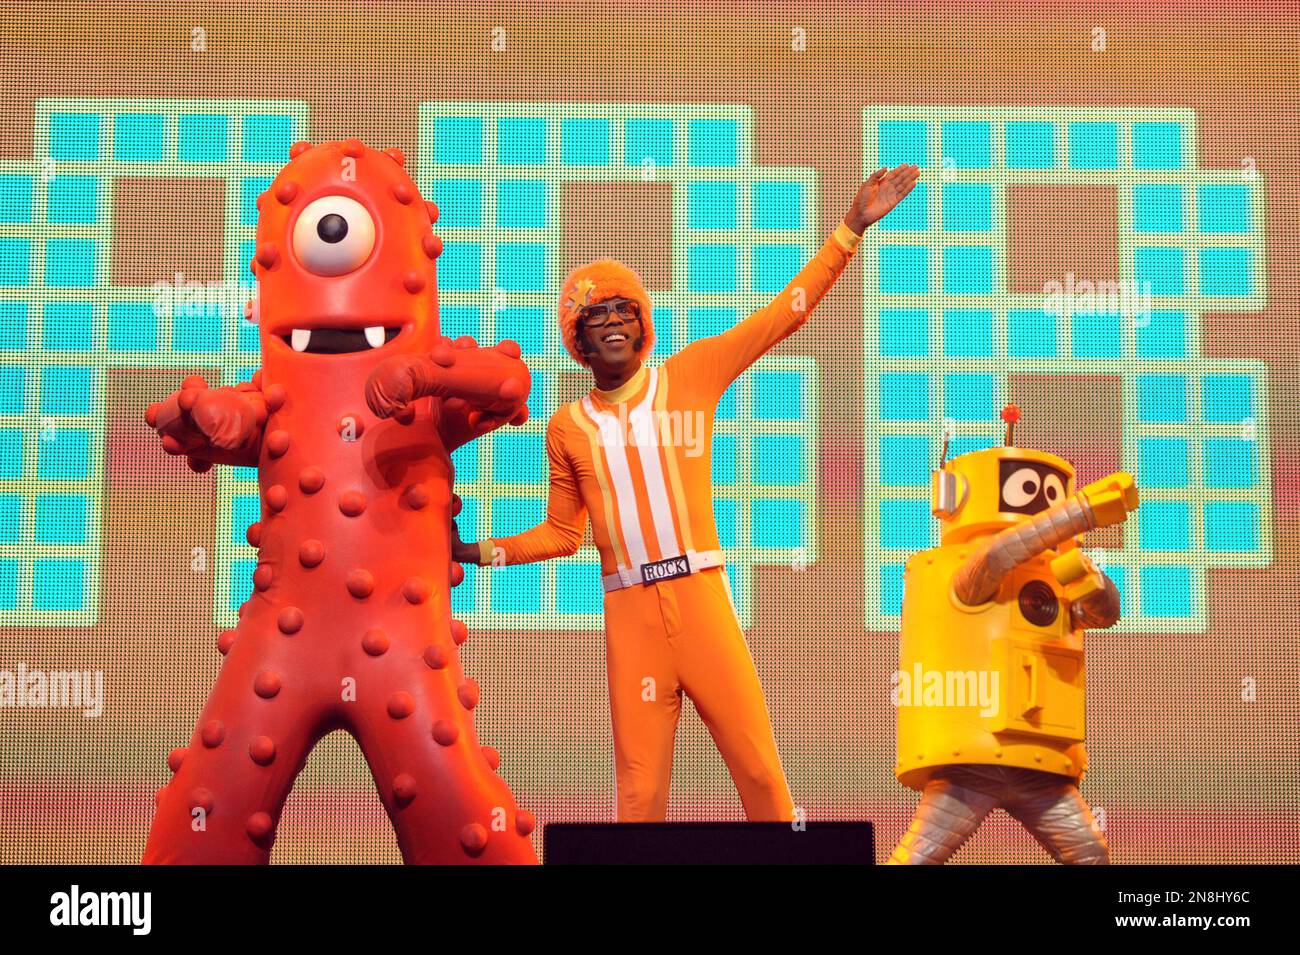 https://c8.alamy.com/comp/2N8HY6C/dj-lance-rock-center-muno-and-plex-perform-onstage-at-yo-gabba-gabba!-live!-get-the-sillies-out!-50-city-tour-kick-off-performance-on-thanksgiving-weekend-at-nokia-theatre-la-live-on-friday-nov-23-2012-in-los-angeles-photo-by-john-shearerinvision-for-gabbacadabra-llcap-images-2N8HY6C.jpg